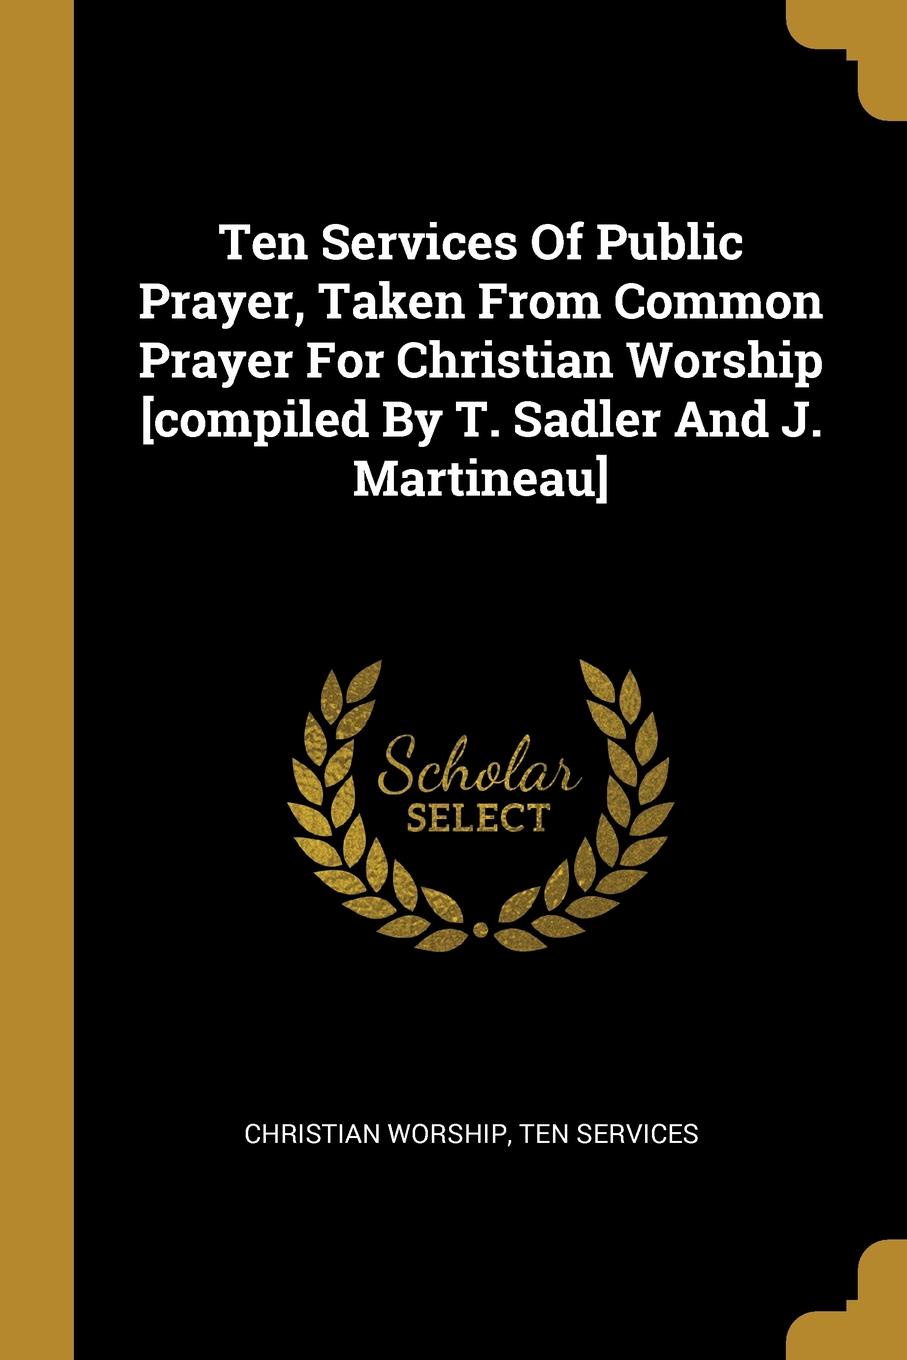 Ten Services Of Public Prayer, Taken From Common Prayer For Christian Worship .compiled By T. Sadler And J. Martineau.